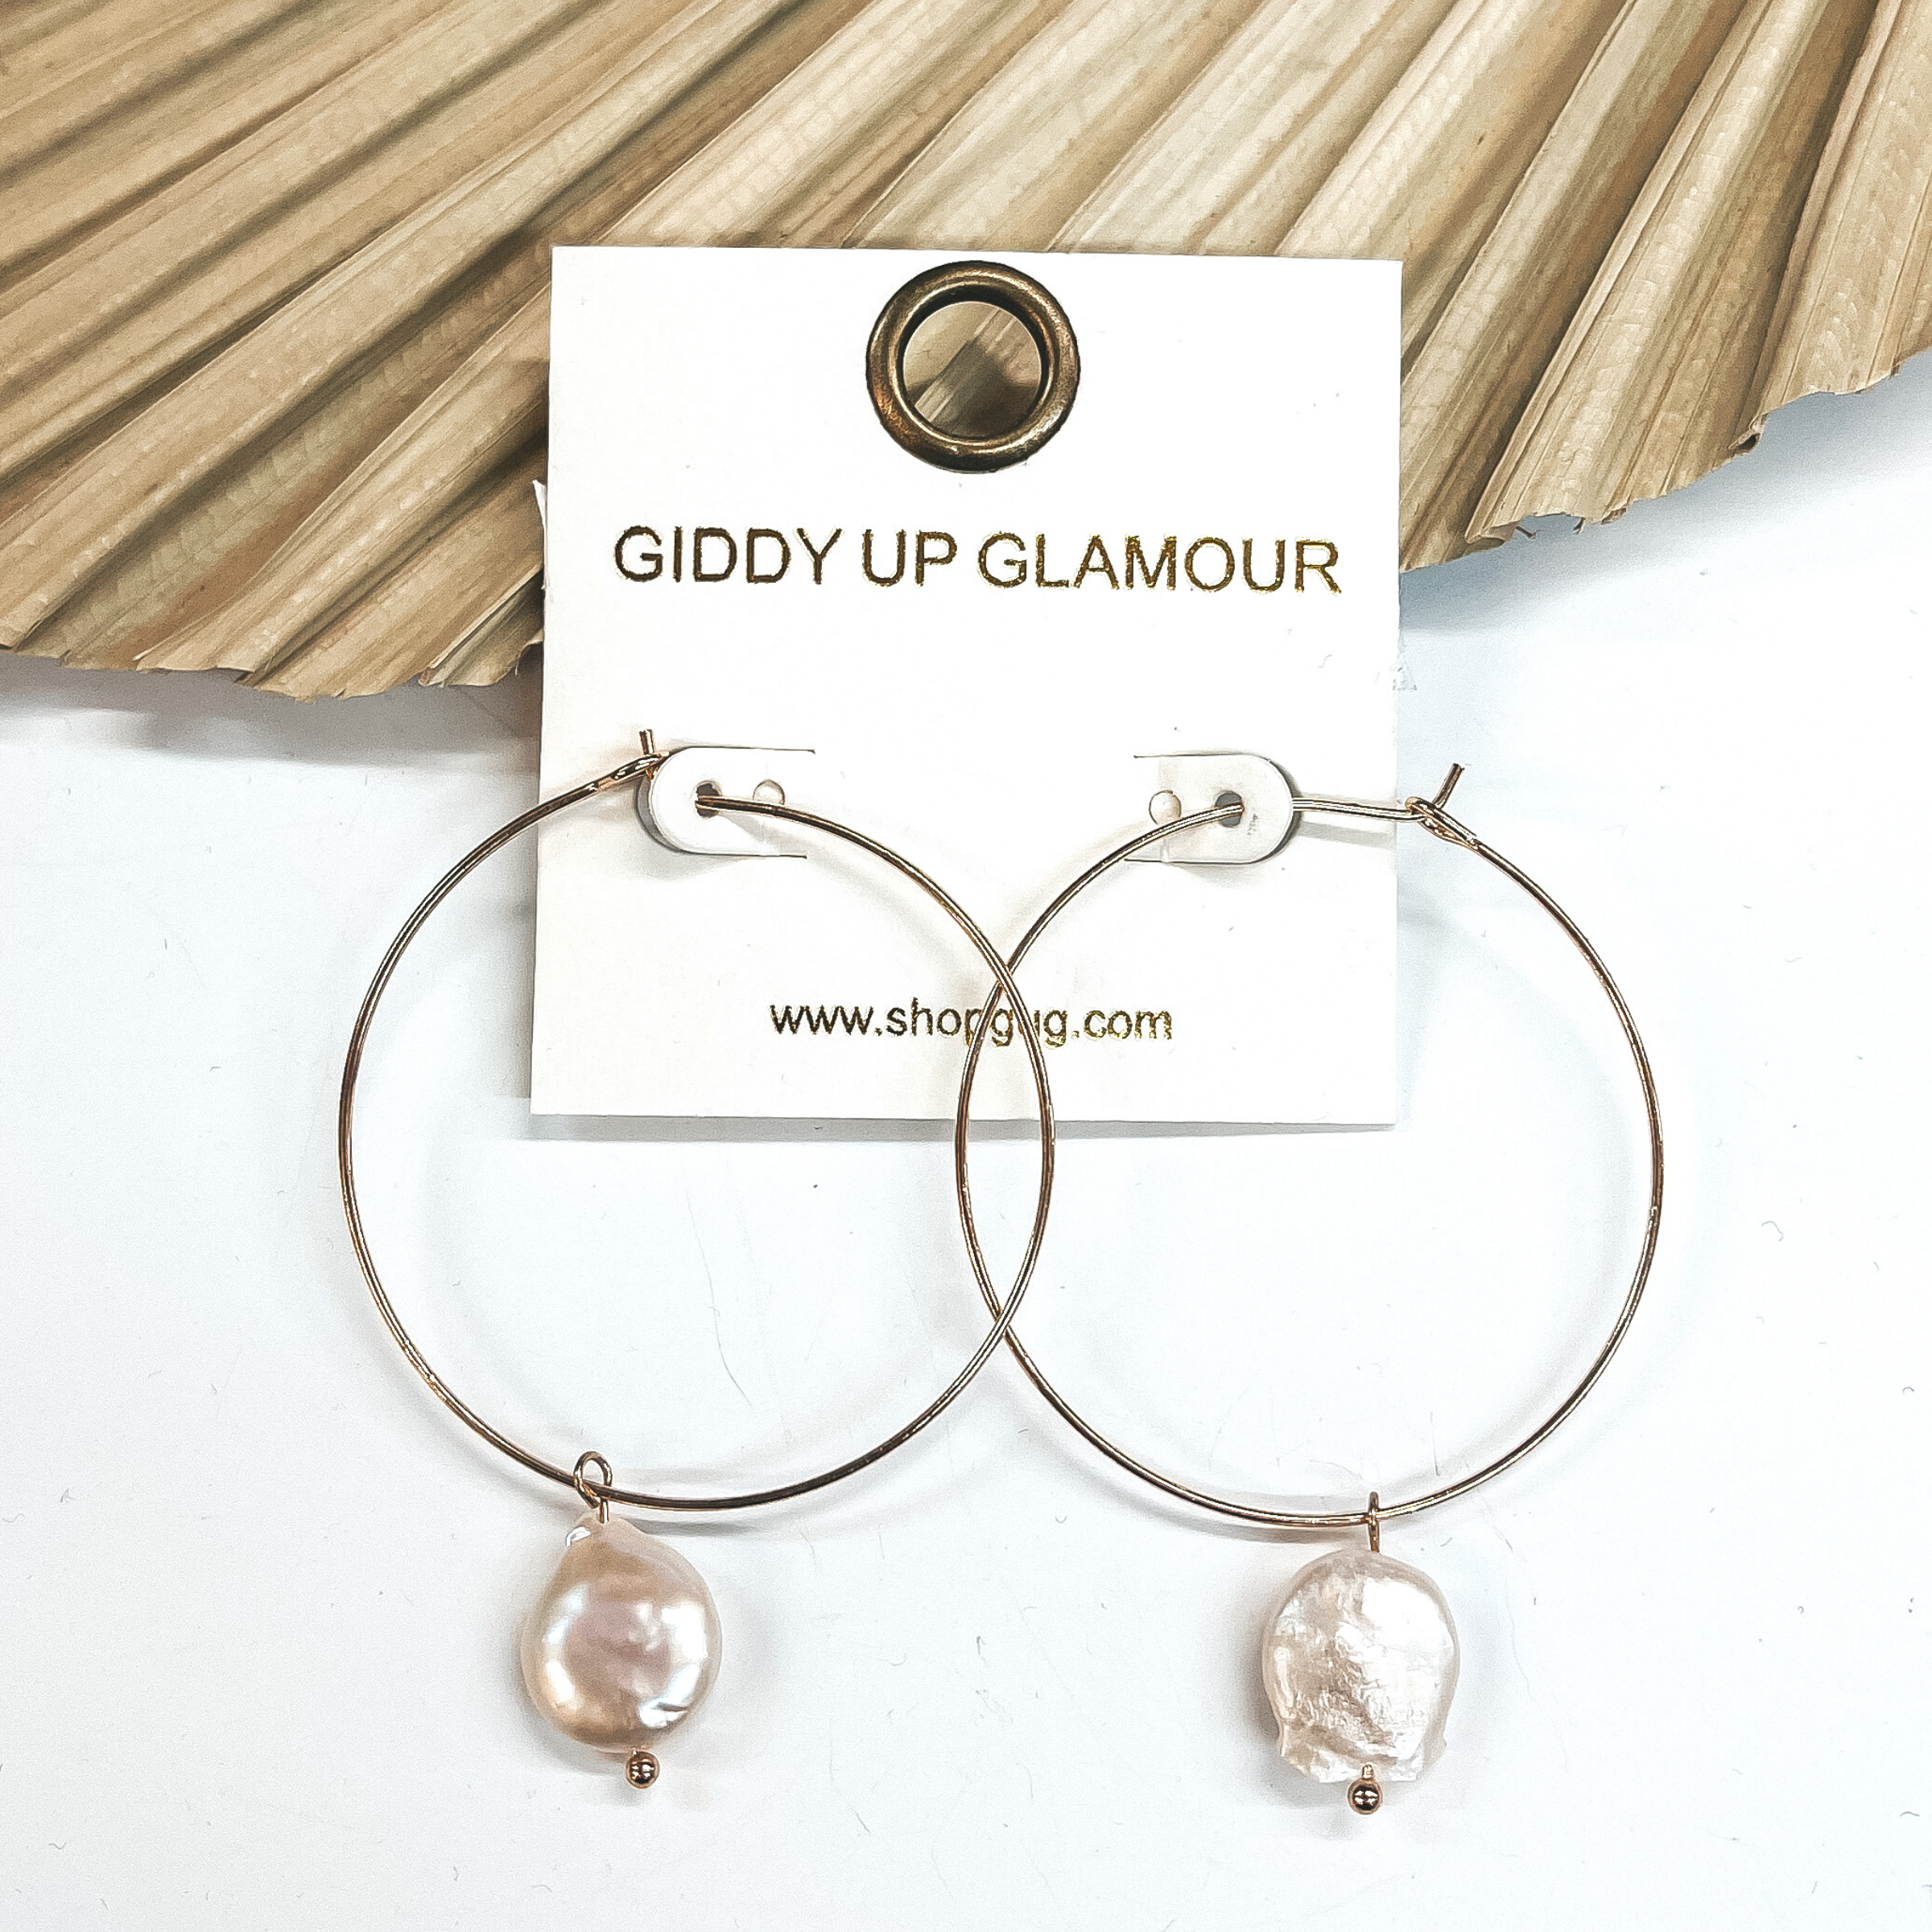 Thin gold wired hoop earings that includes a  pearl charm in the center. These earrings  are pictured on a white background with a  dried up palm leaf in the back as decor.